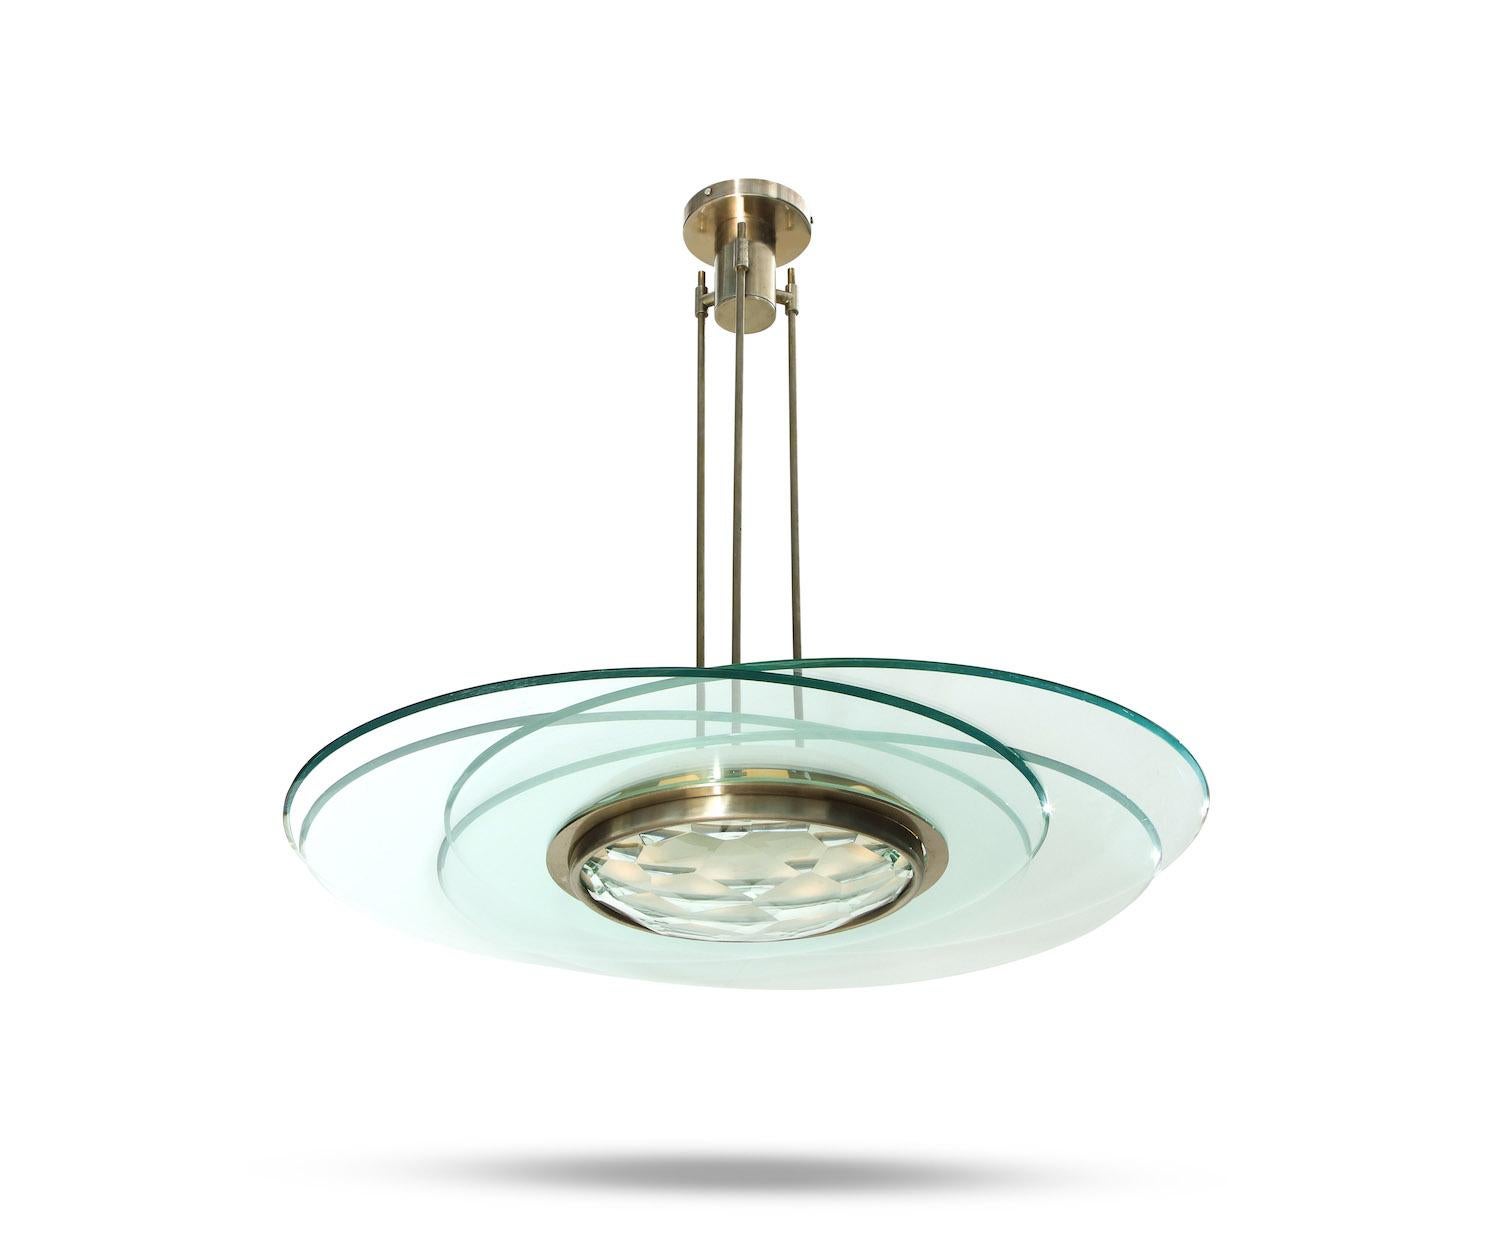 Max Ingrand for Fontana Arte rare hanging light. Model #2127 comprised of 4 large circular glass panels with beveled edges that are placed around the centre of the fixture. Centre glass bowl with faceted outer face and metal surround. 8 Candelabra